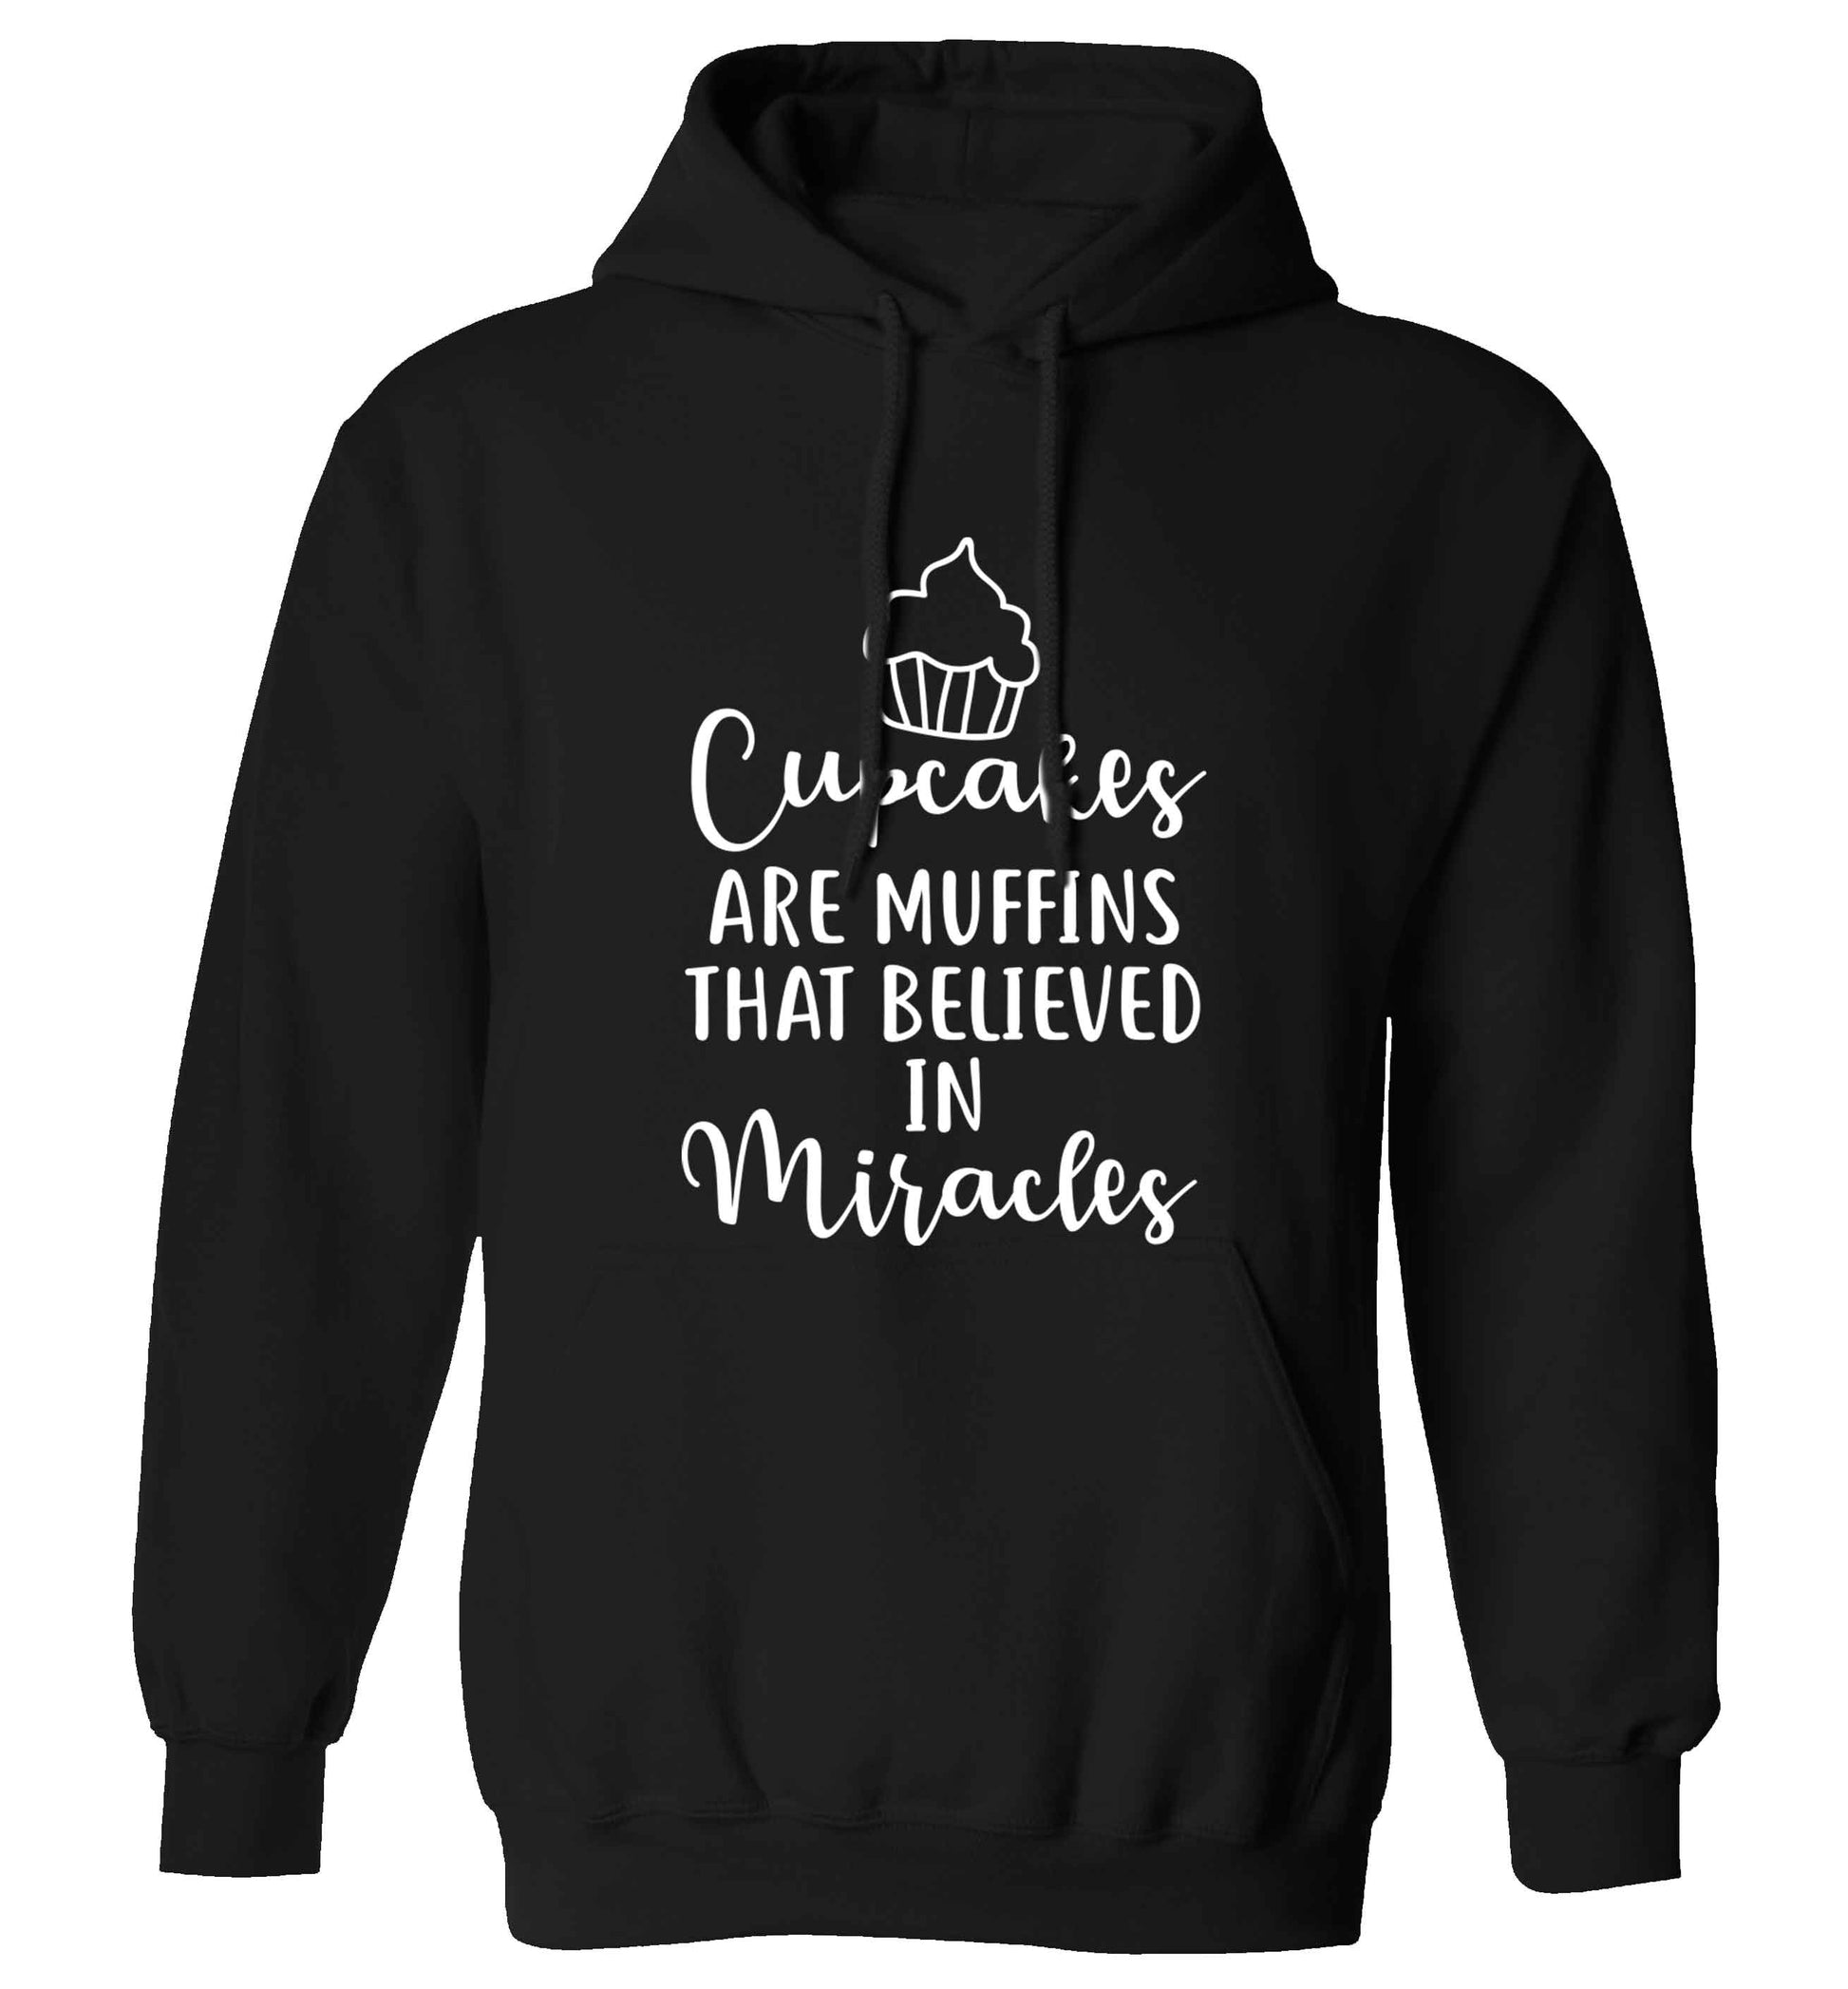 Cupcakes muffins that believed in miracles adults unisex black hoodie 2XL